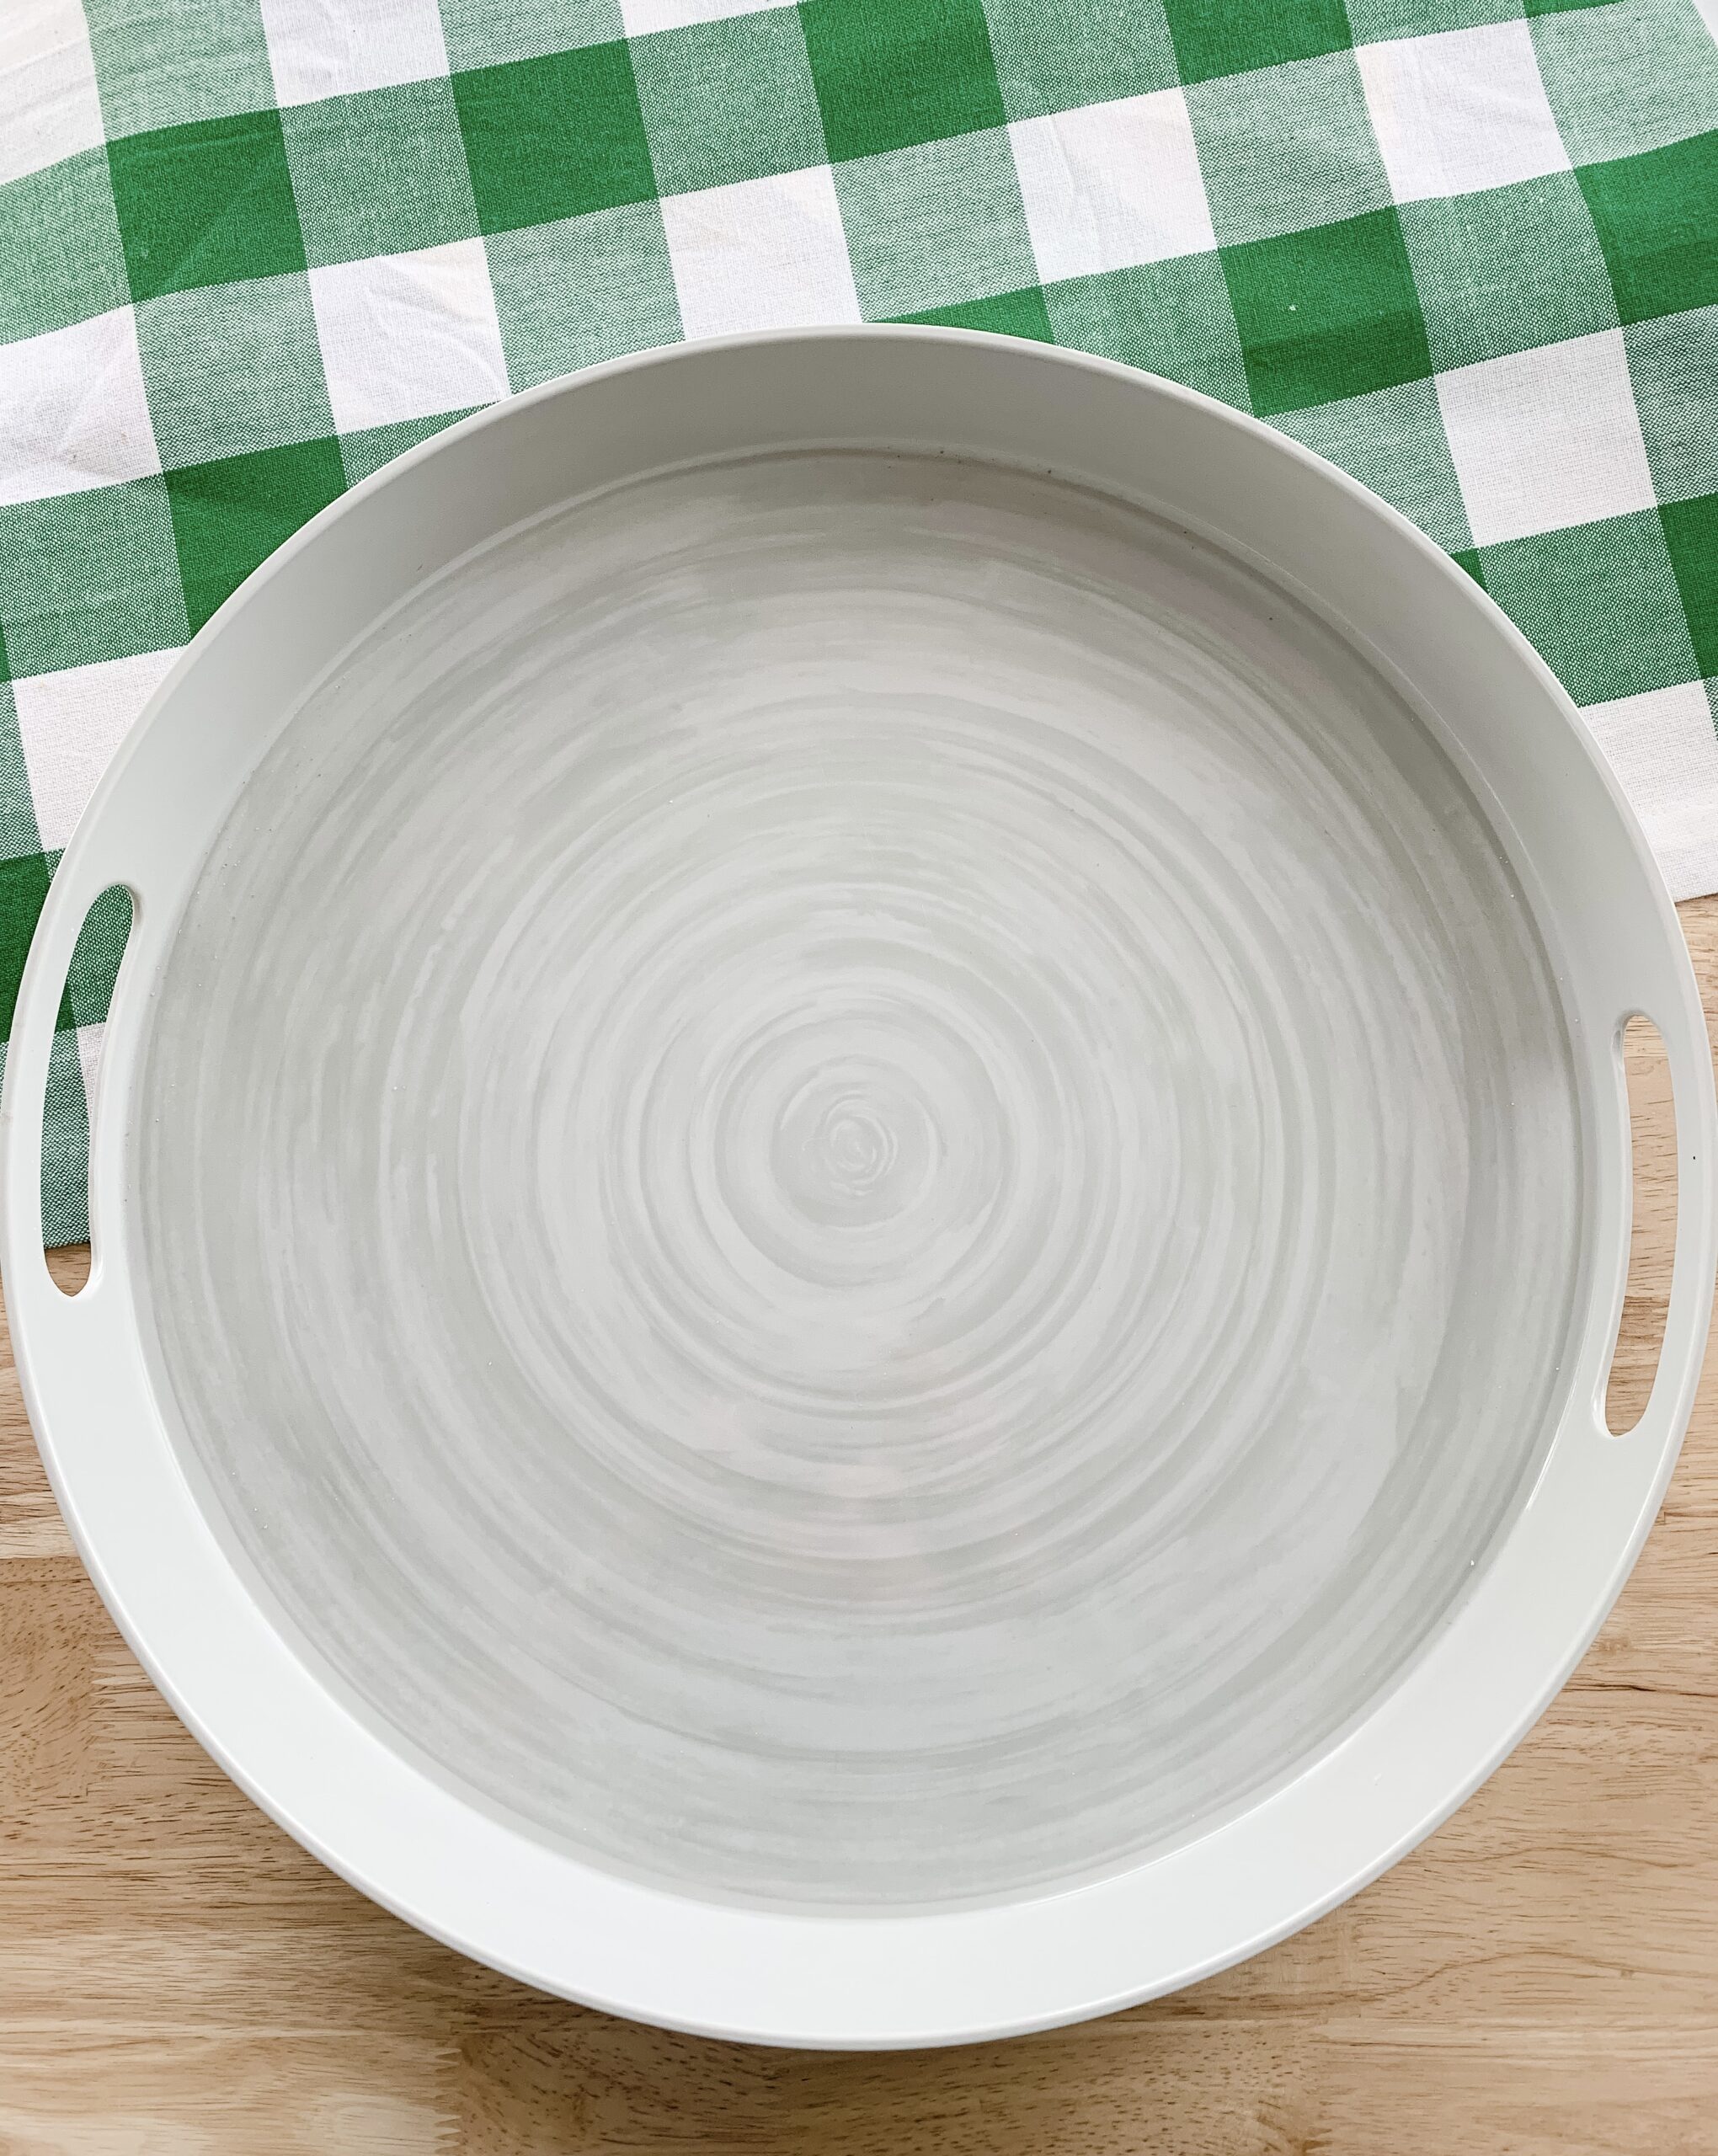 large handled platter on wooden table